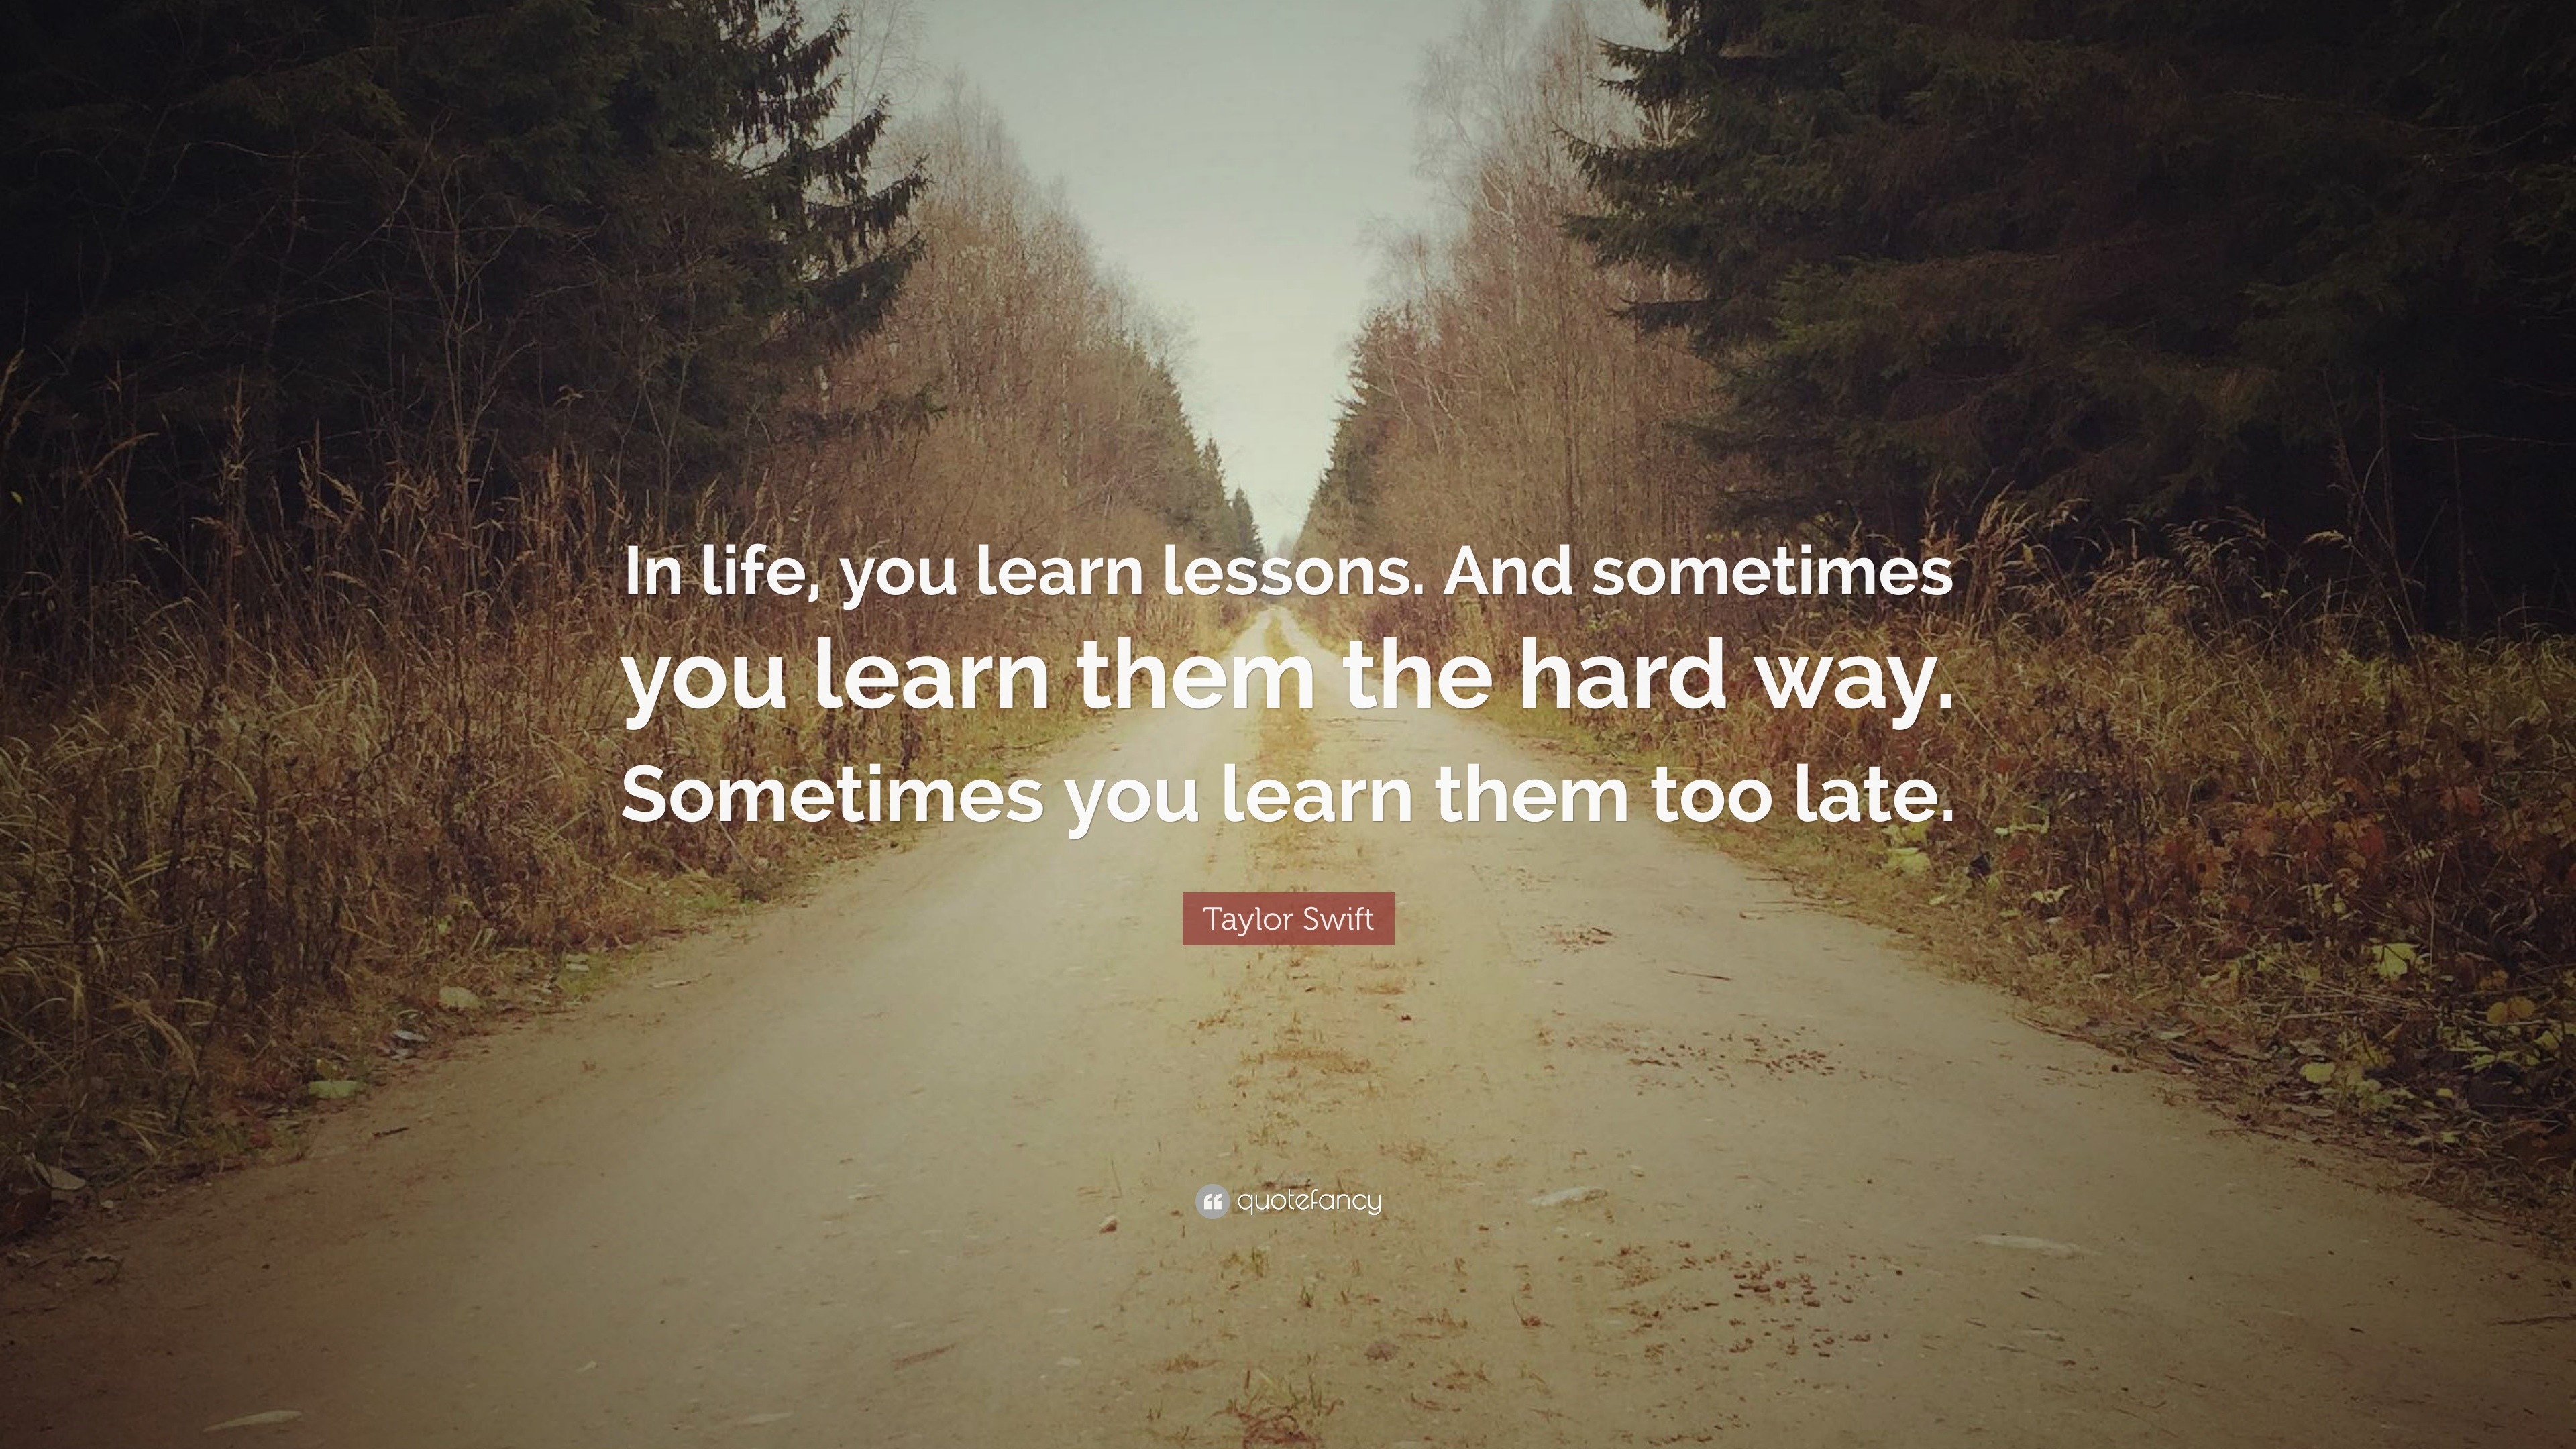 11 Life Lessons You Don't Have to Learn the Hard Way